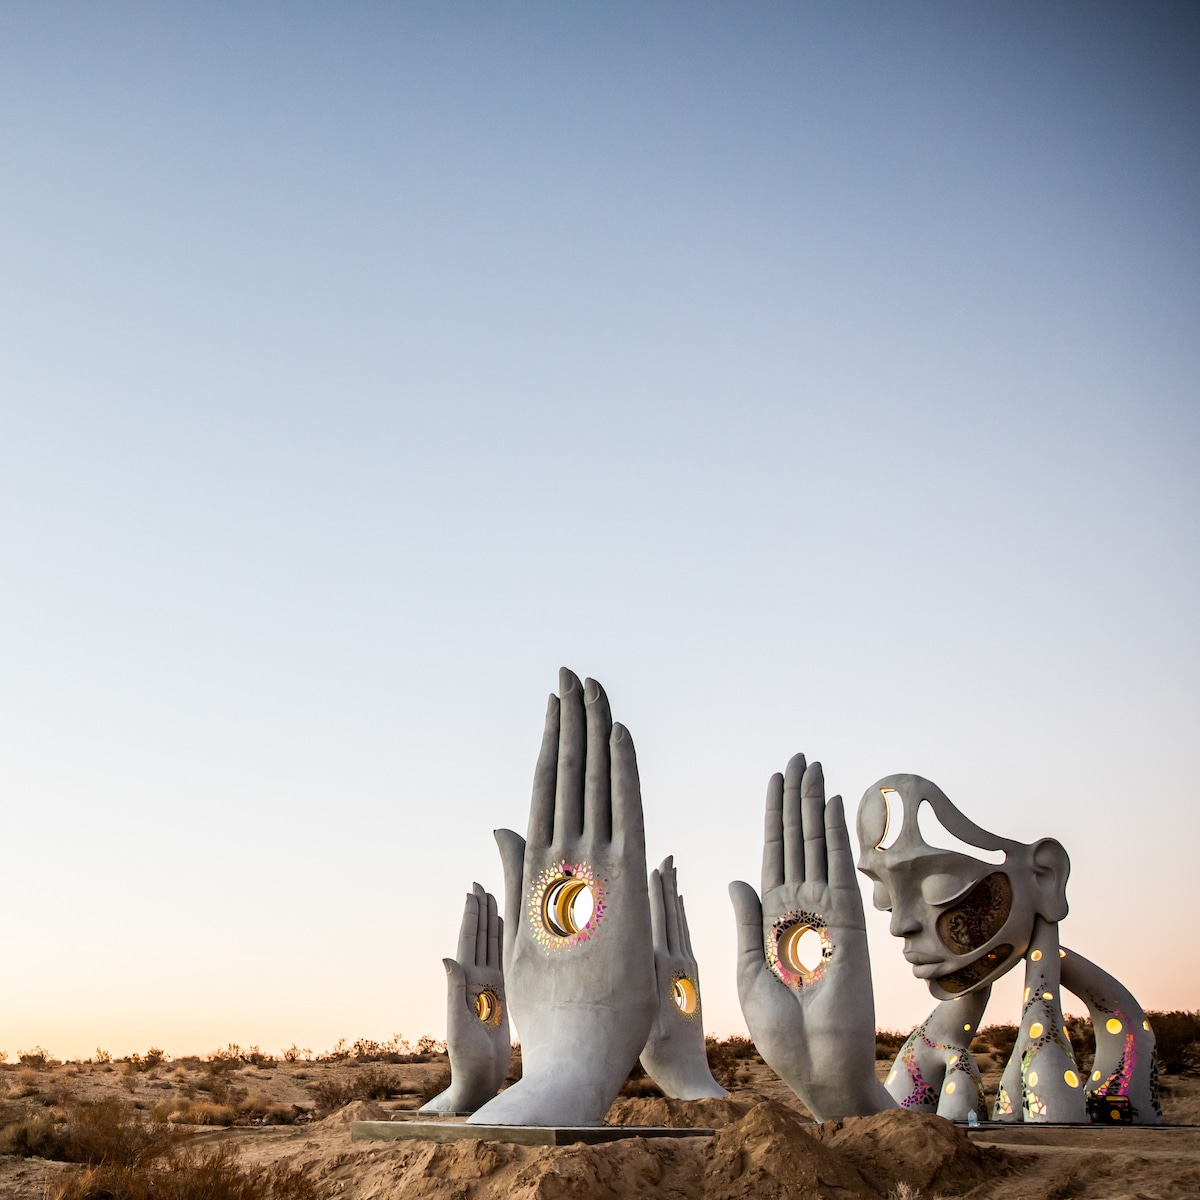 Transmission, A Surreal Sculpture In The Mojave Desert By Daniel Popper (2)